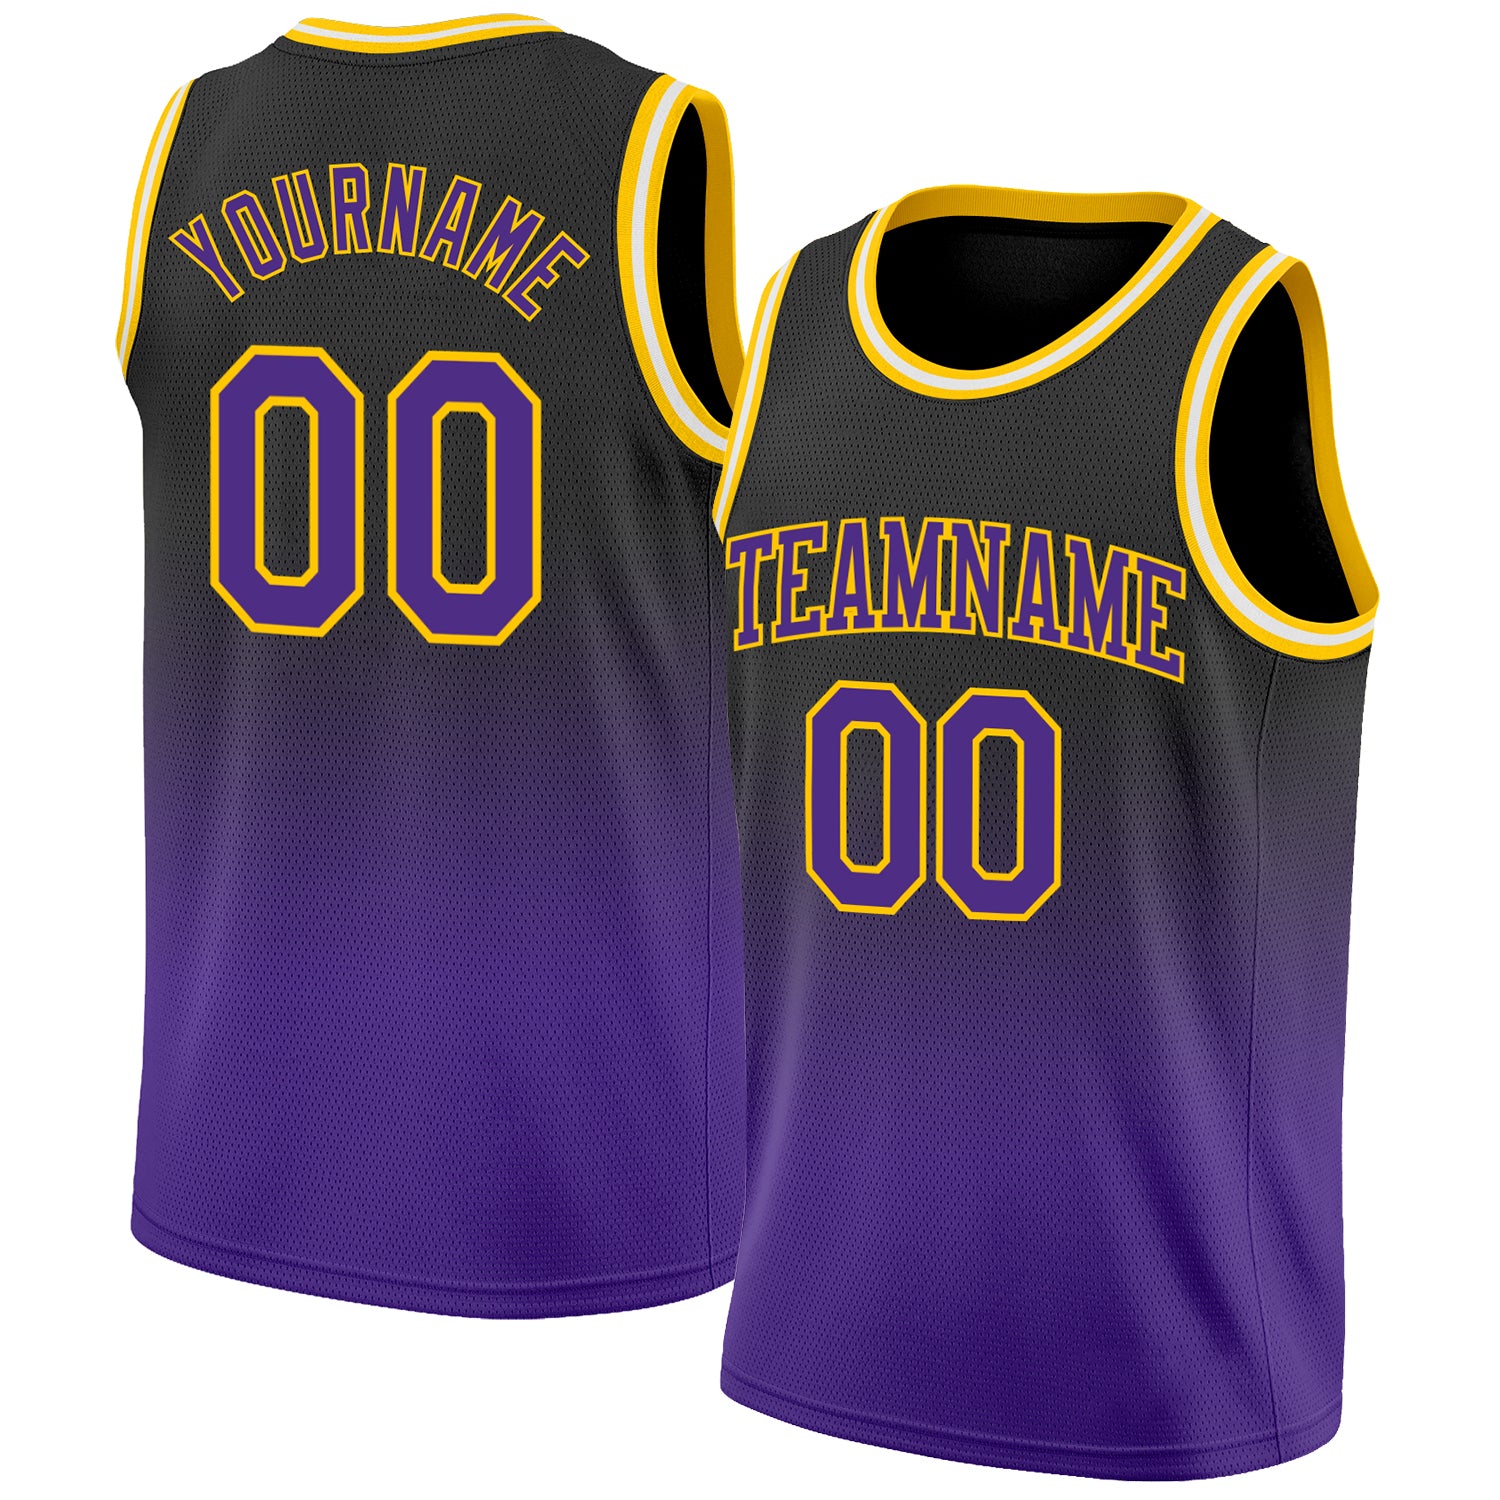 Subimods Sports Series Basketball Jersey Black w/ Purple and Gold Accents -  Medium